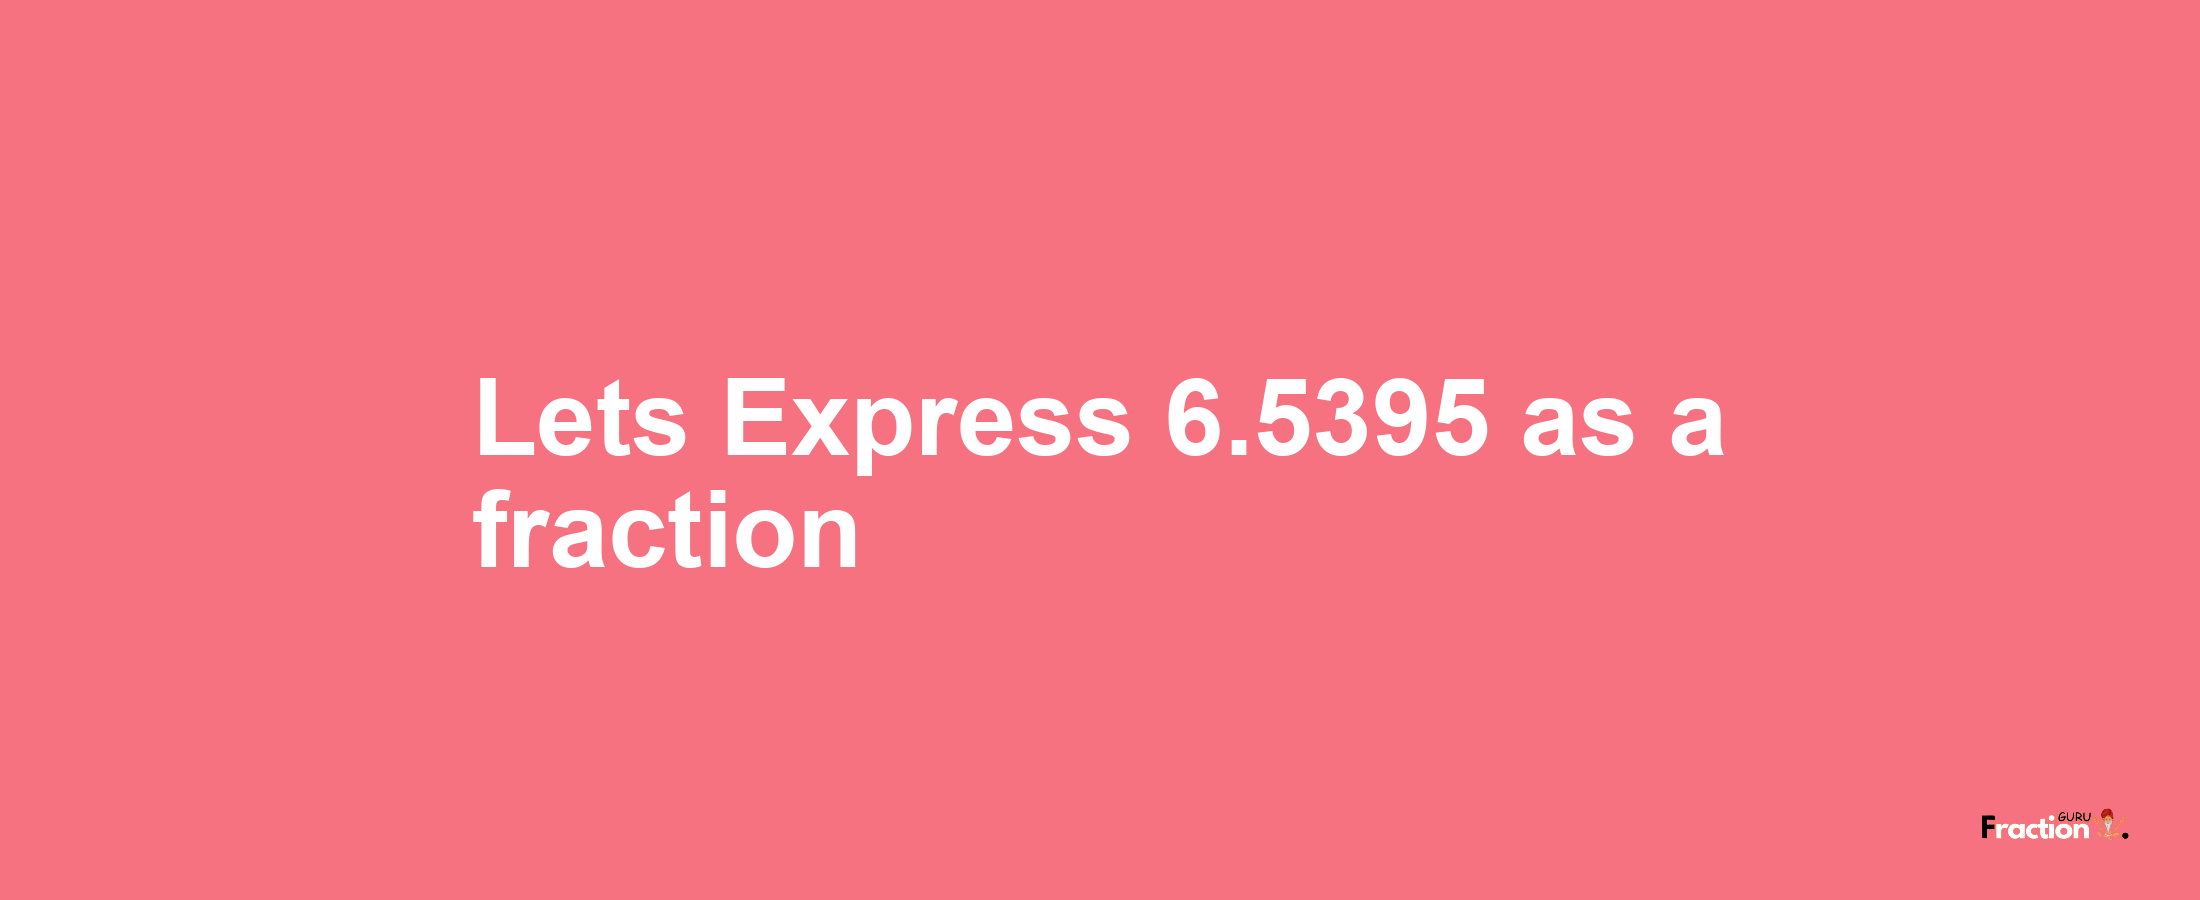 Lets Express 6.5395 as afraction